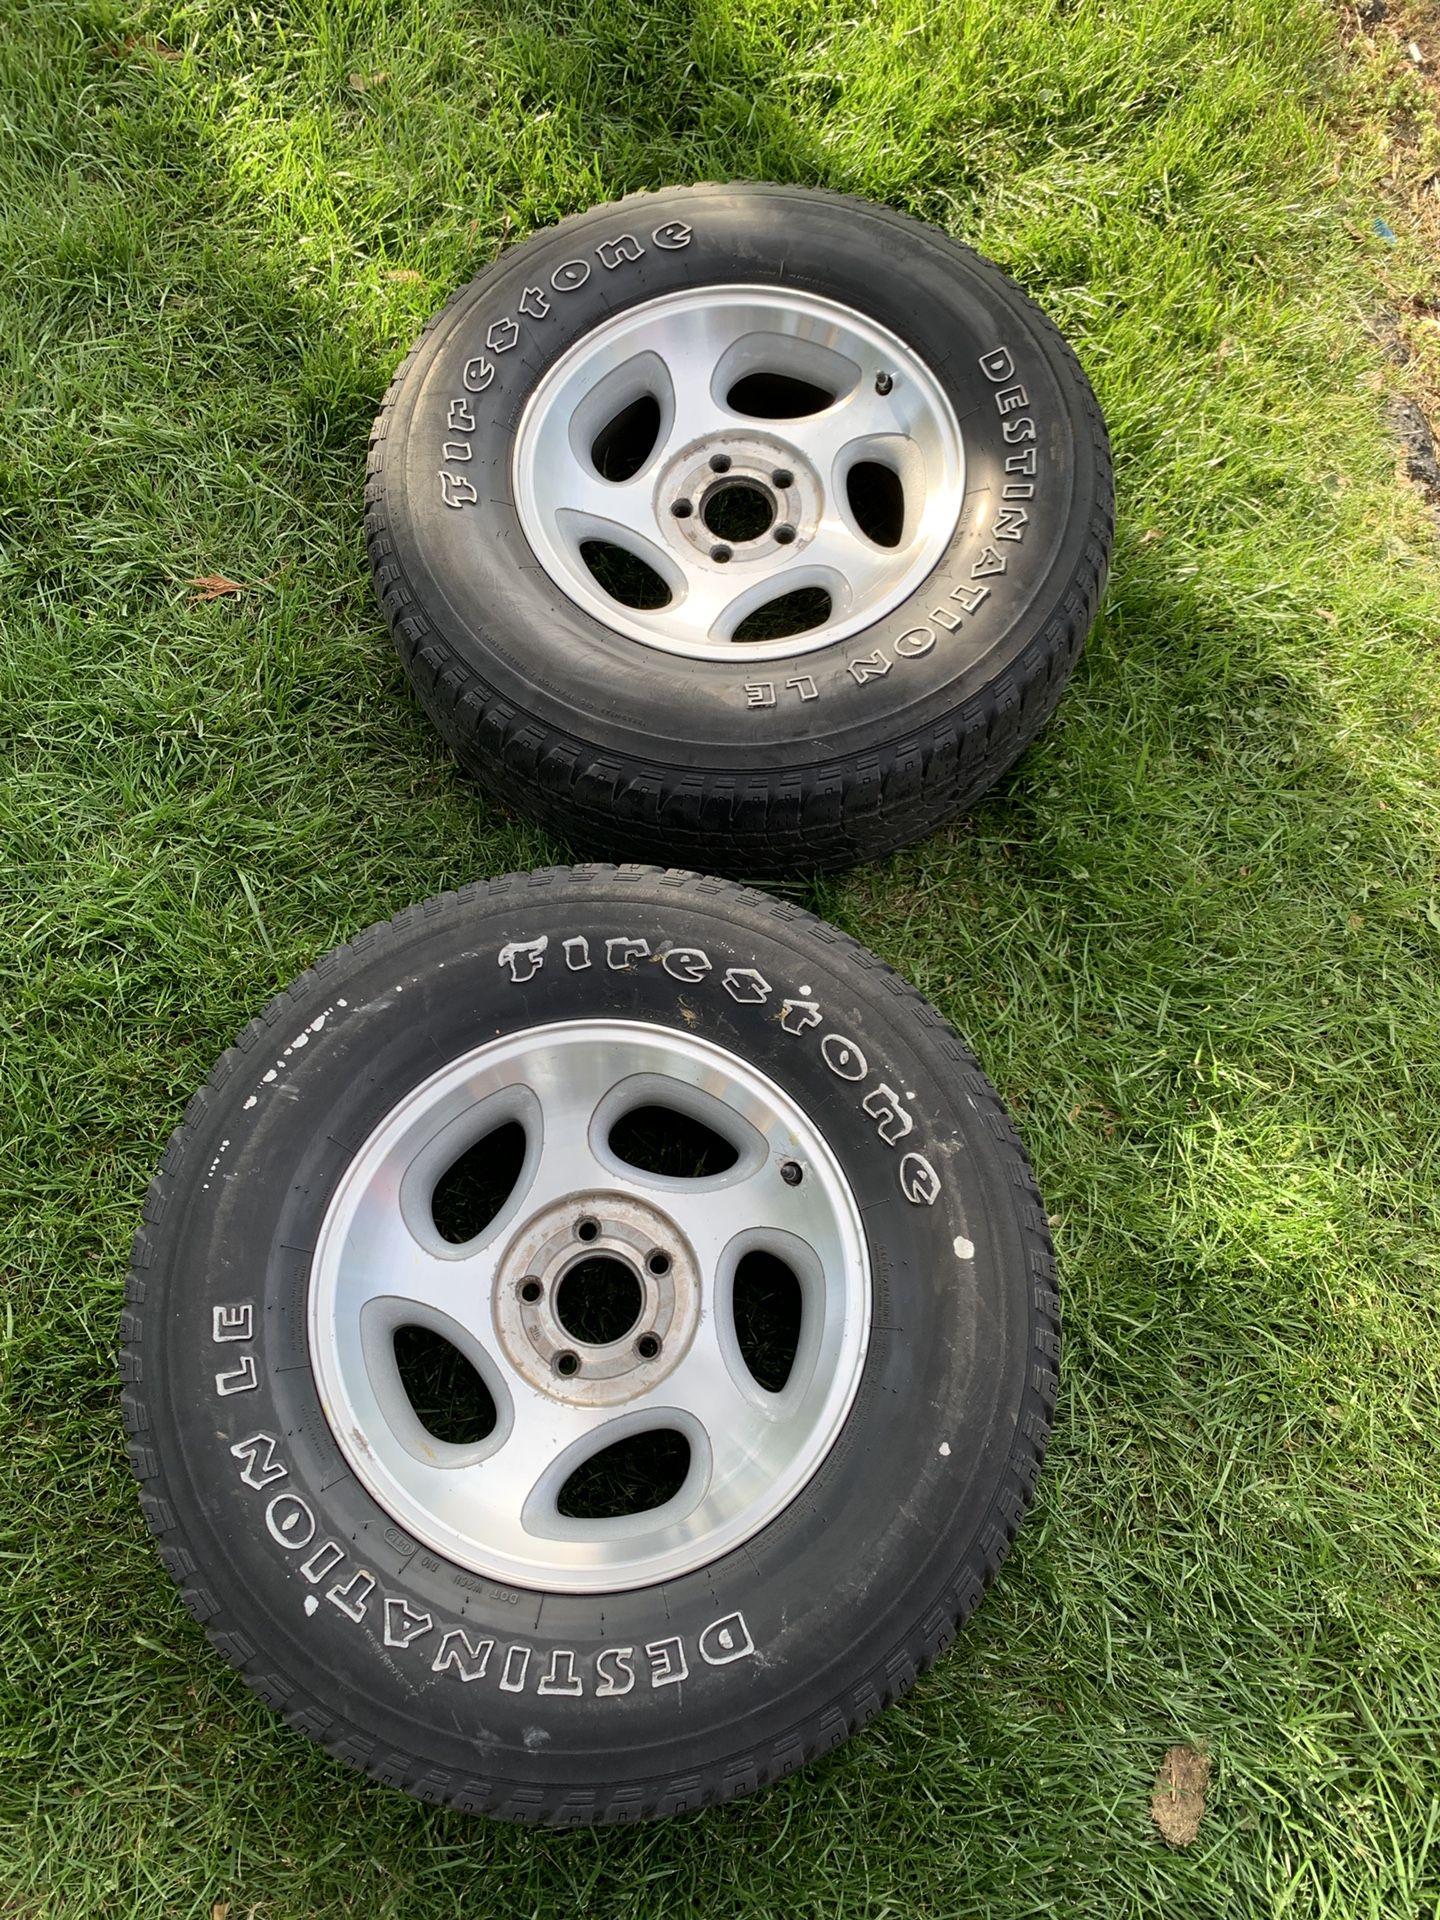 2004 Ford Explorer Rims and tires